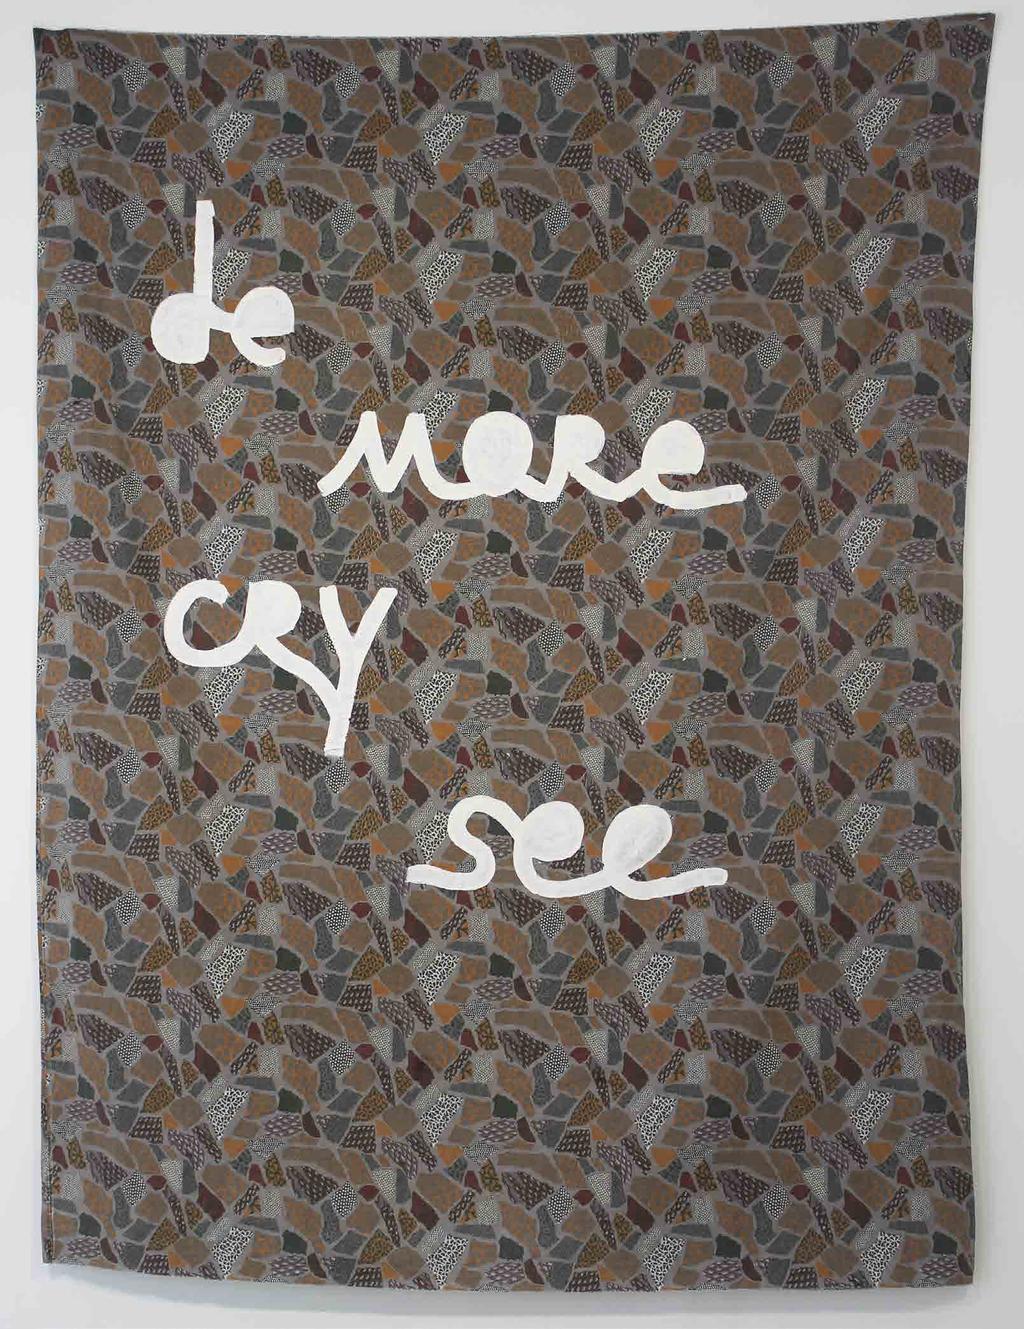 De More Cry See, 2018 Painting